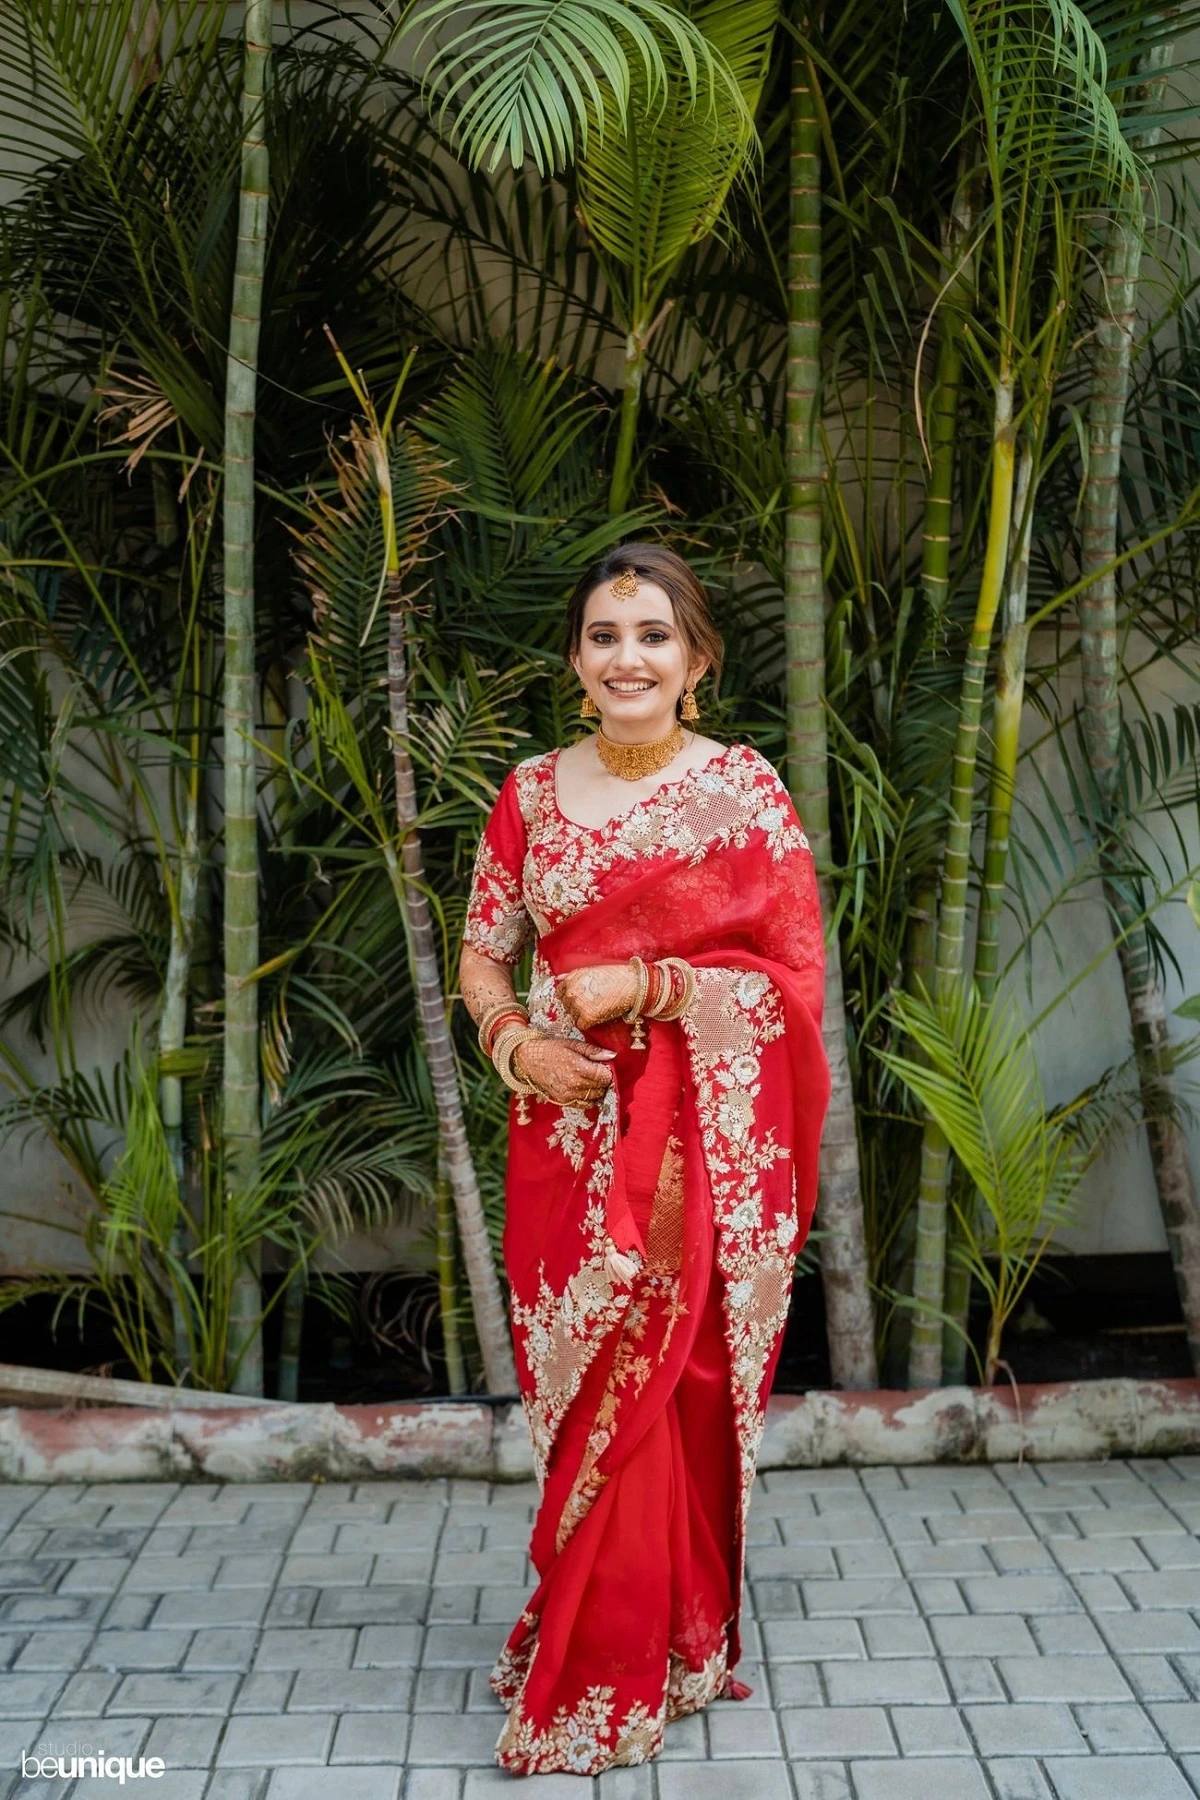 fancy red wedding saree with white floral border